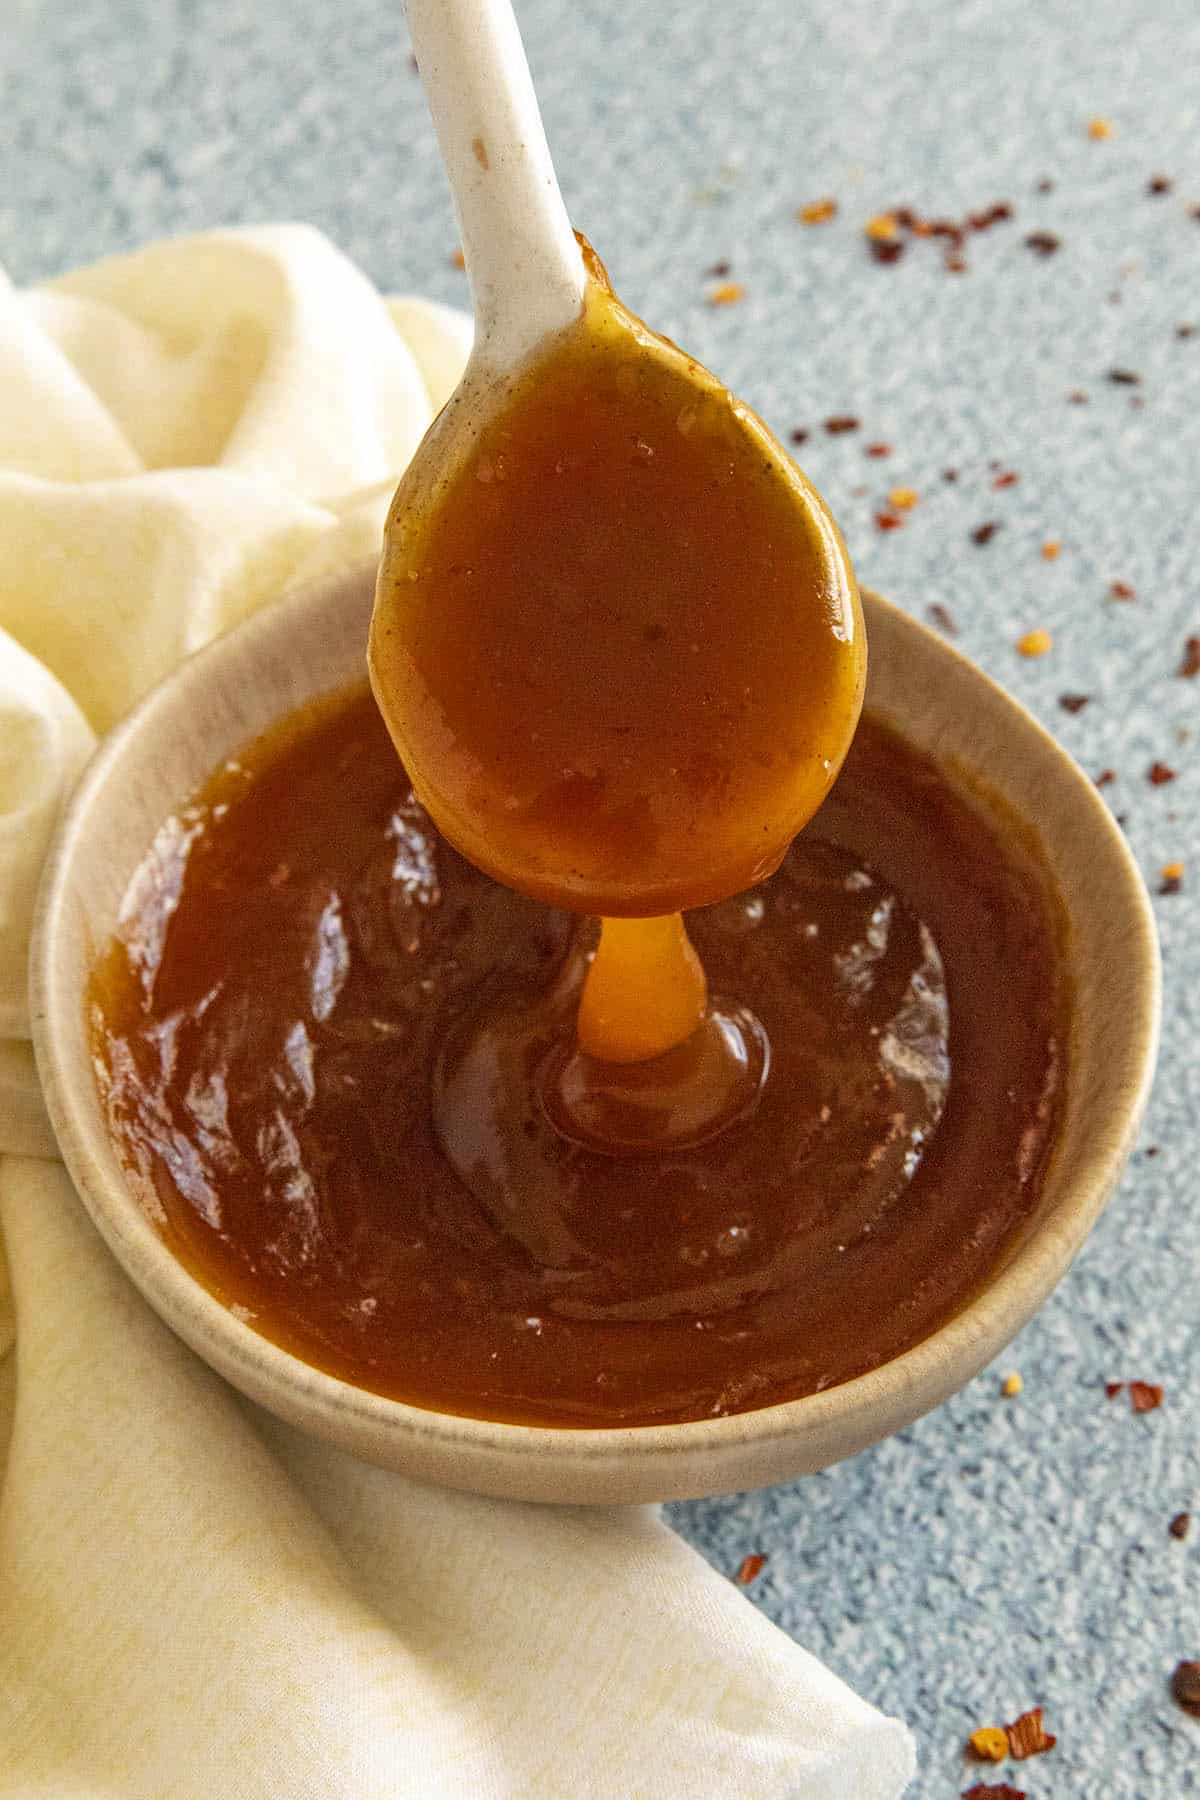 Sweet and Sour Sauce dripping from a spoon